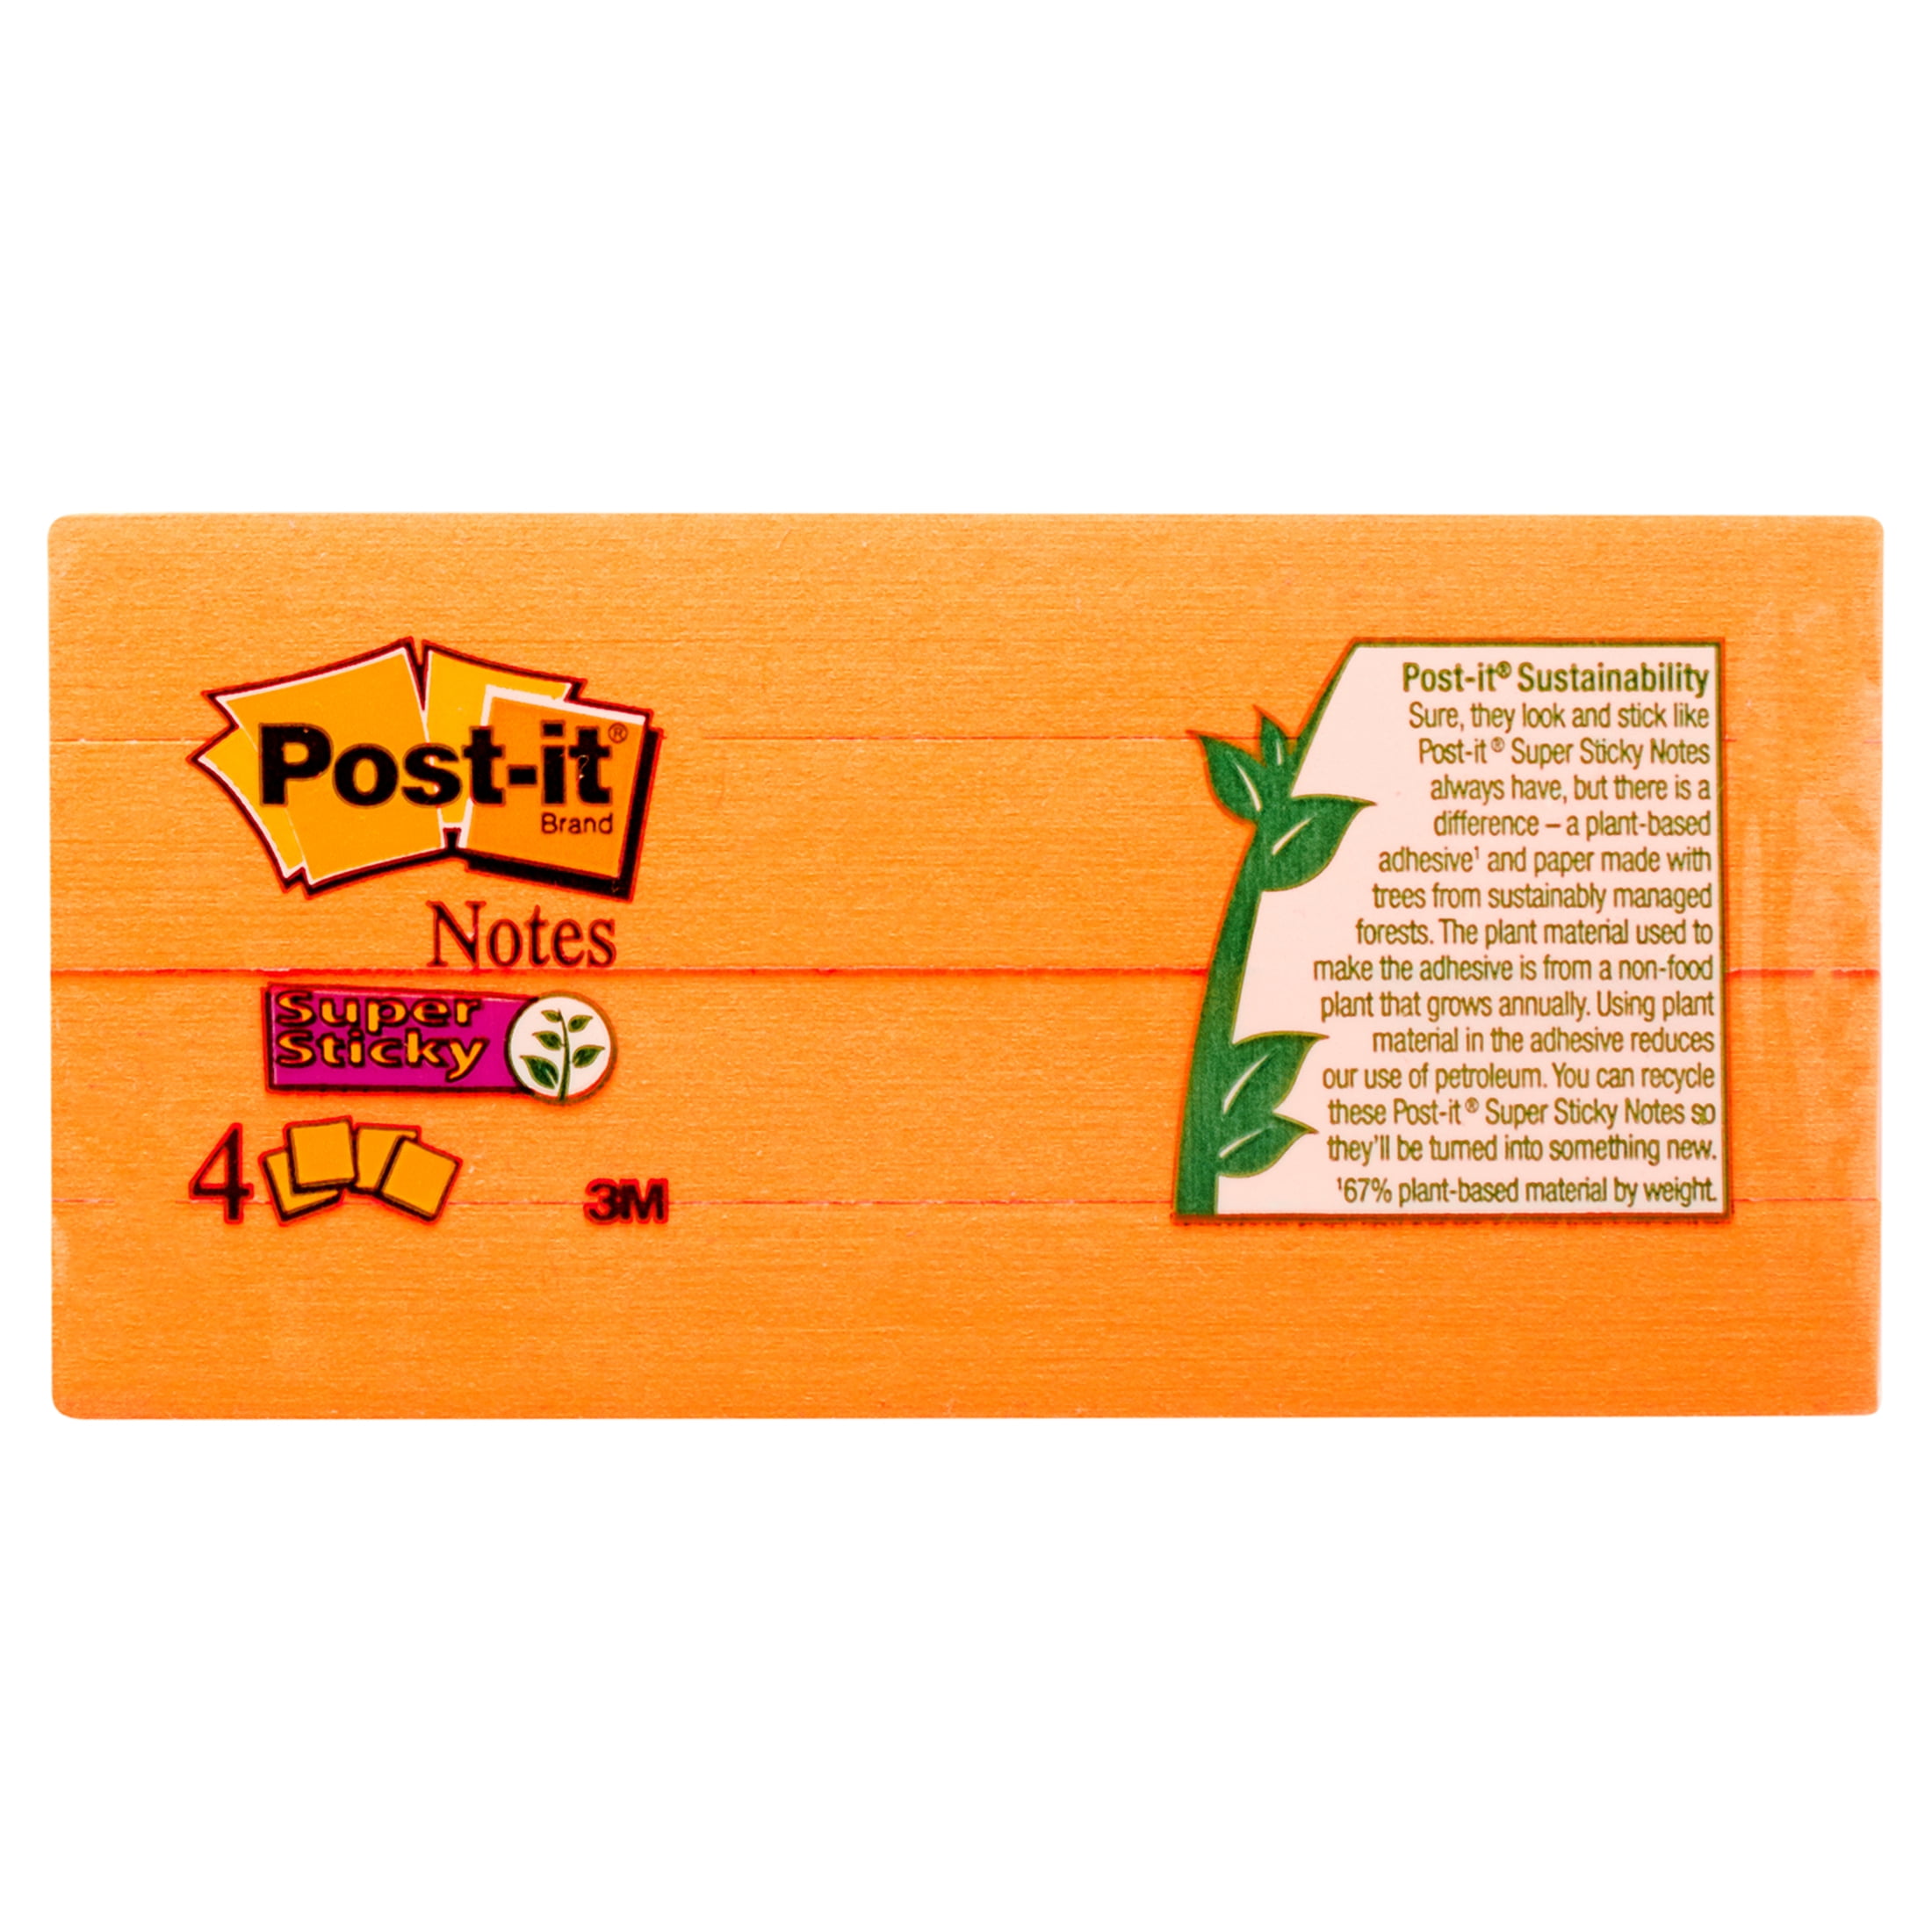 Post-it Super Sticky Notes Neon 4x4  Hy-Vee Aisles Online Grocery Shopping